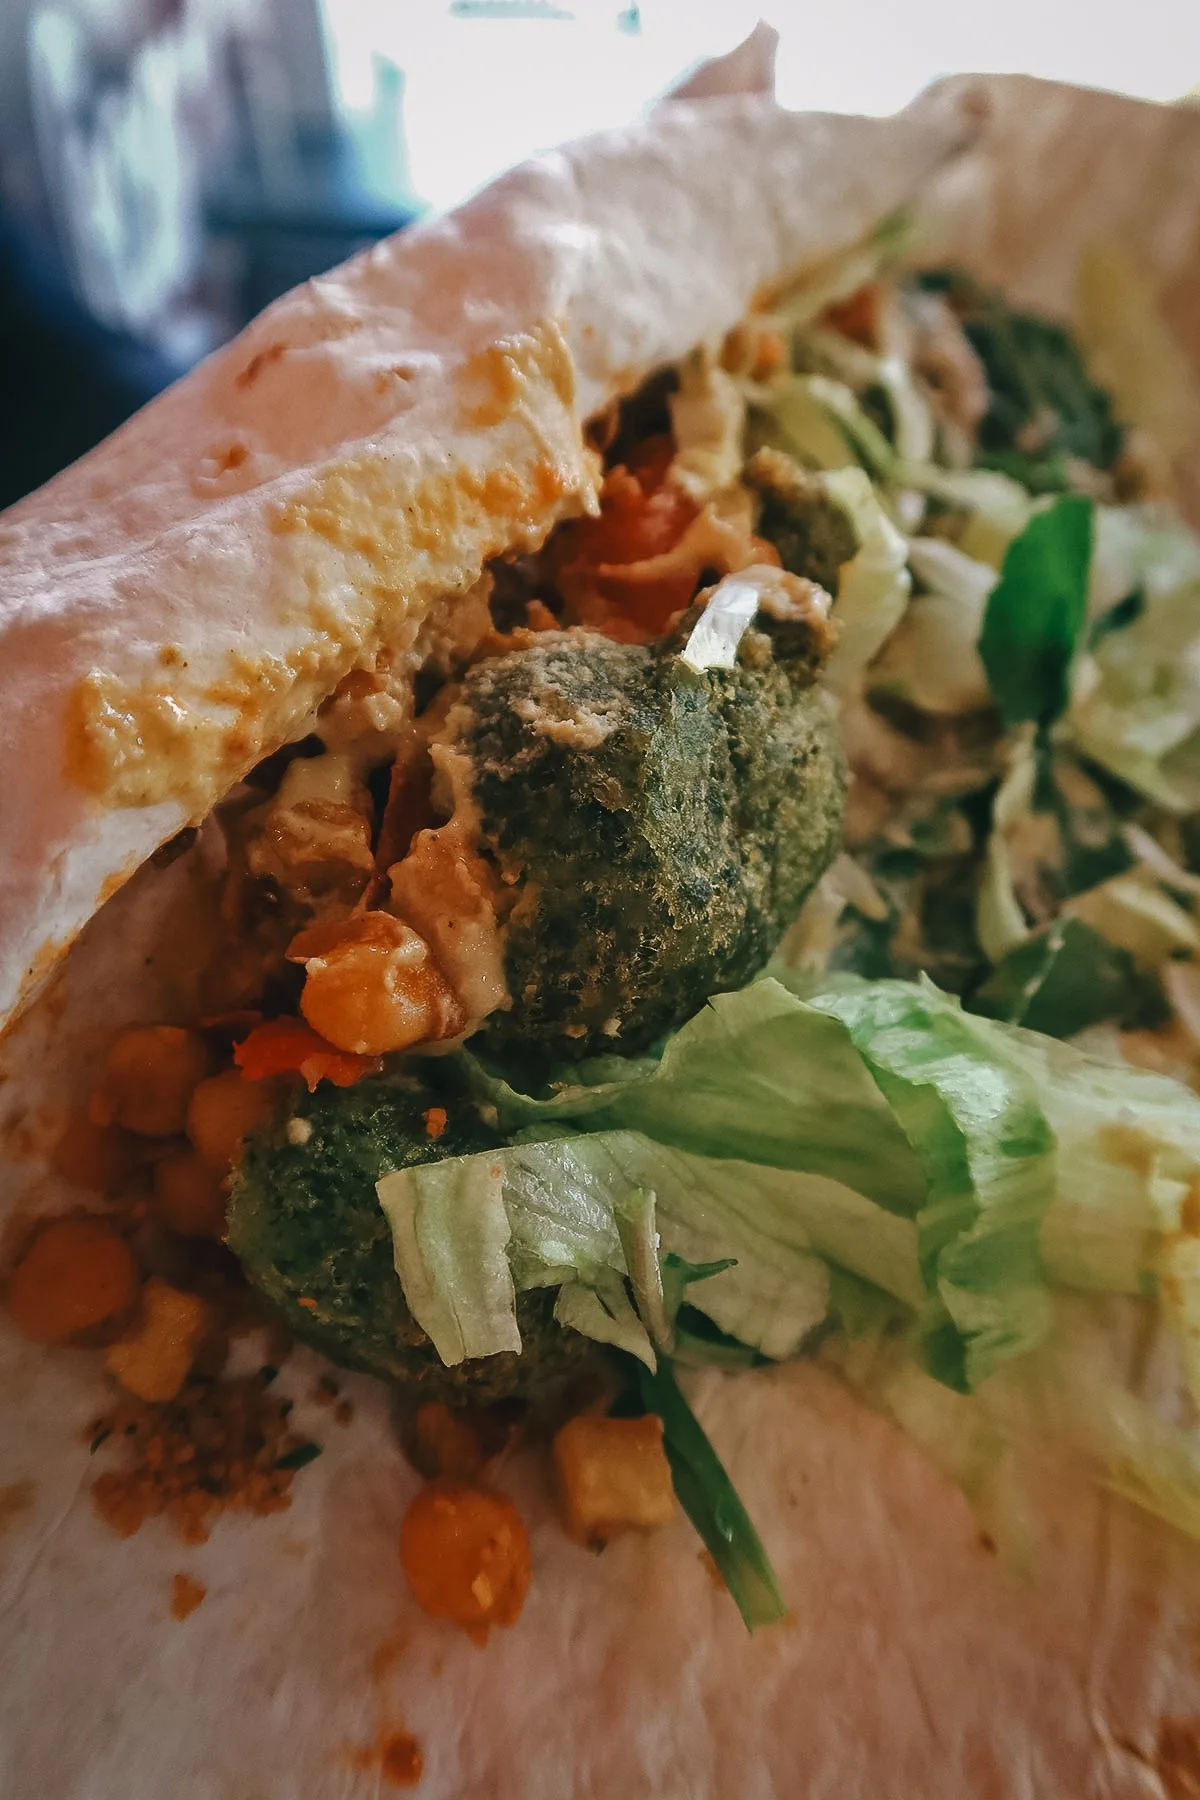 Vegetable wrap at a healthy restaurant in Istanbul